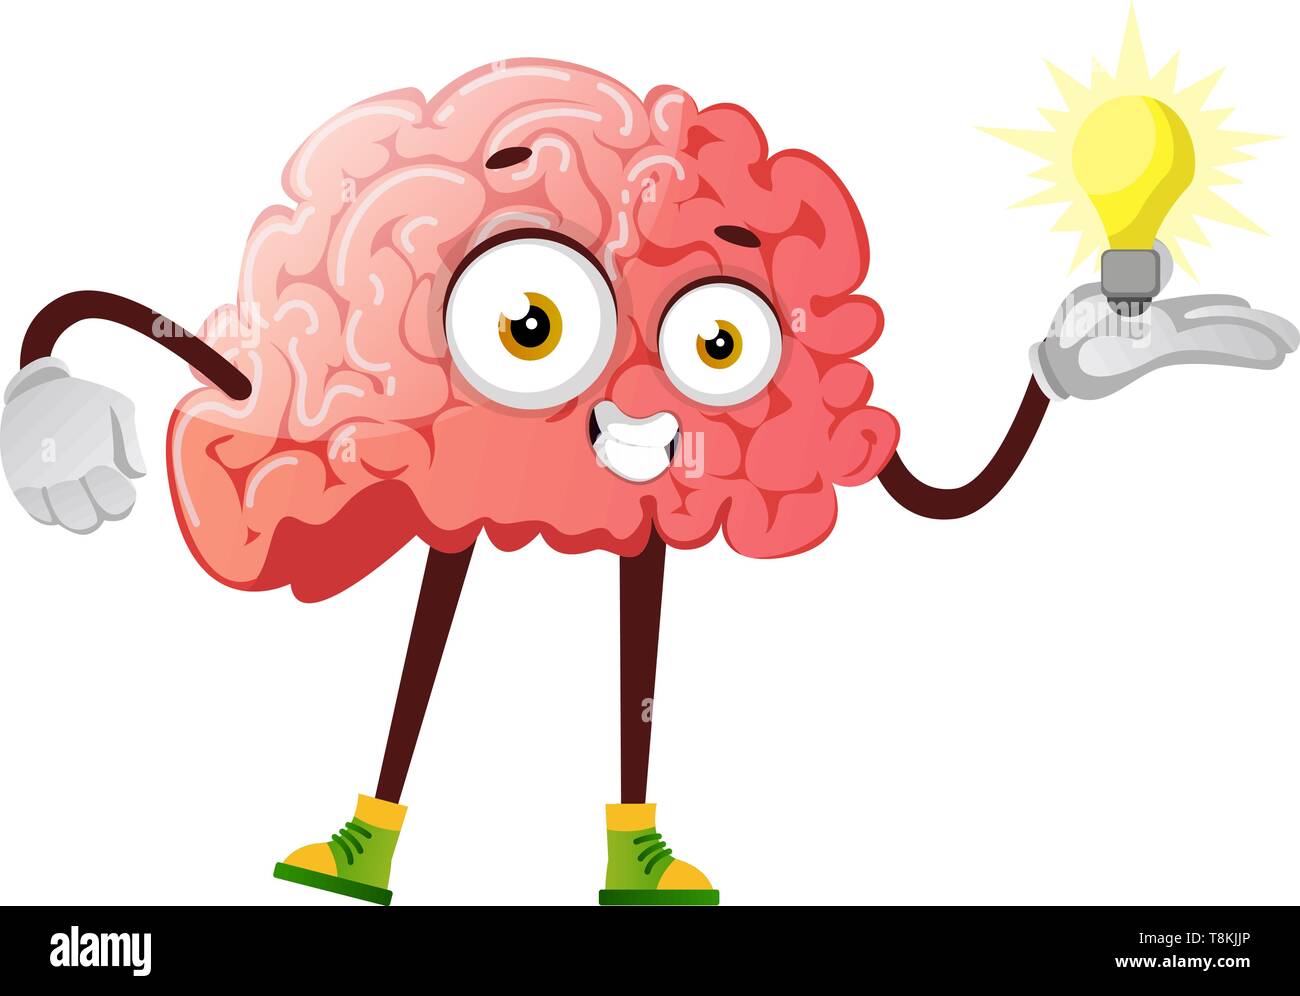 Brain has a great idea, illustration, vector on white background. Stock Vector